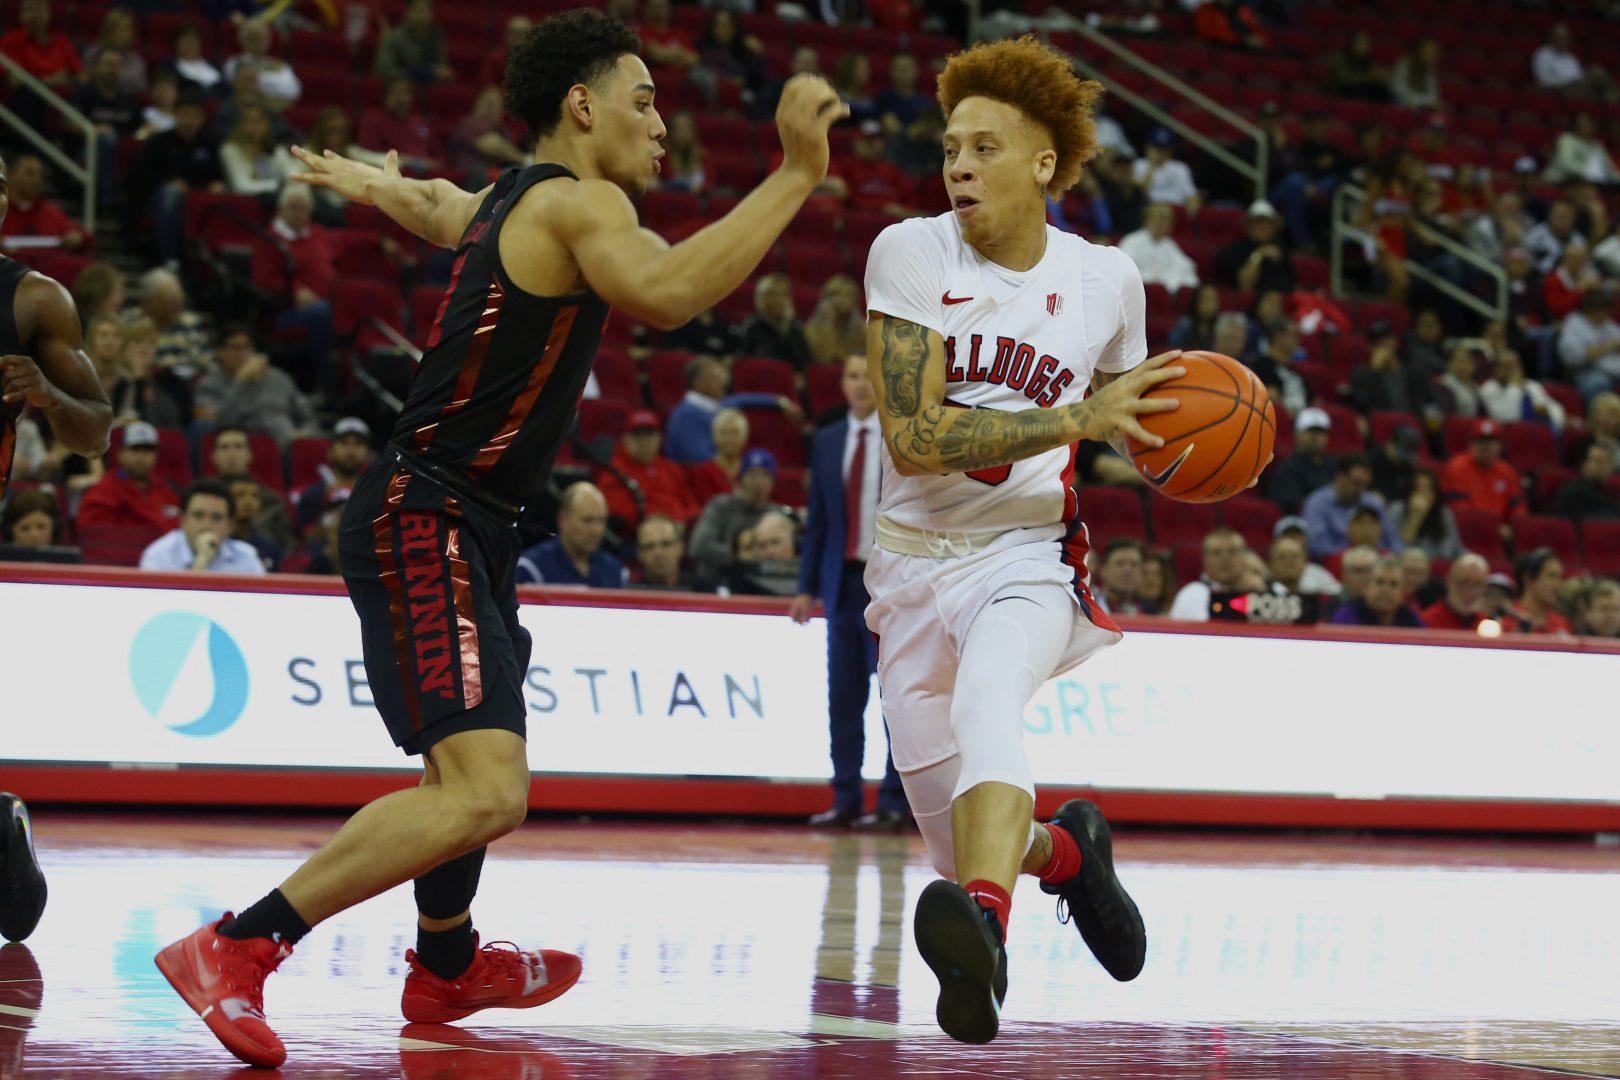 Fresno State guard Noah Blackwell drives the ball to the basket during a home match against the UNLV Revels at the Save Mart Center on Wednesday, Dec. 4, 2019. (Jorge Rodriguez/The Collegian)